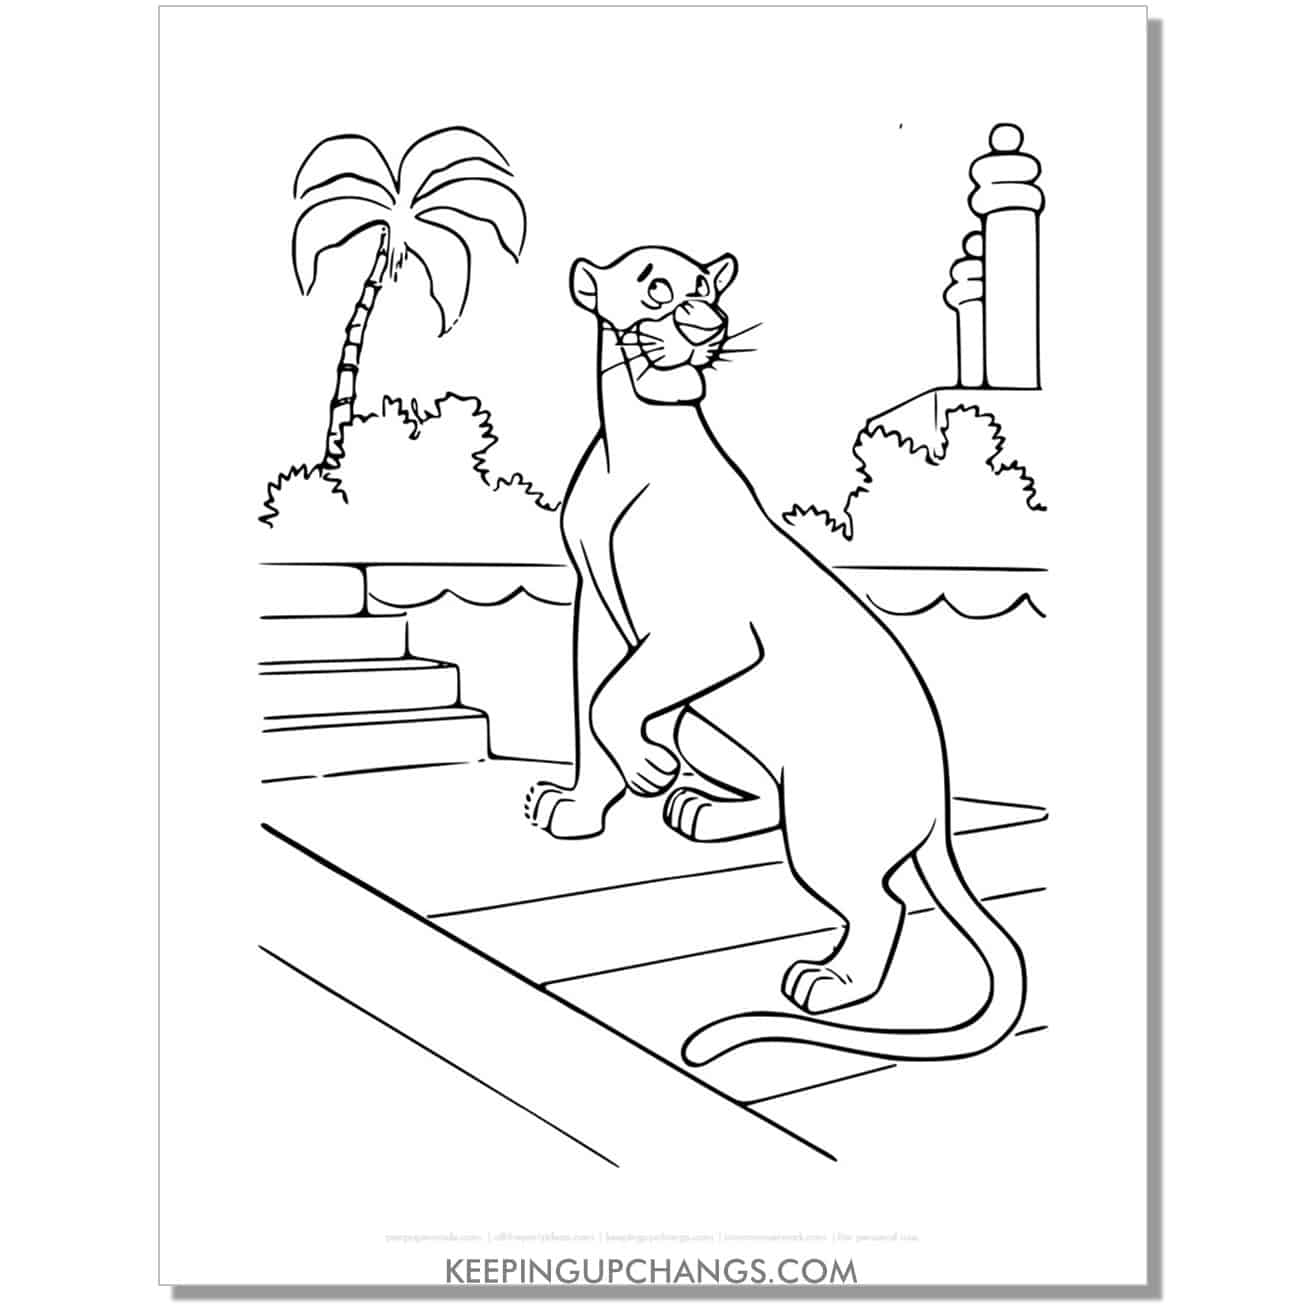 bagheera on temple steps jungle book coloring page, sheet.